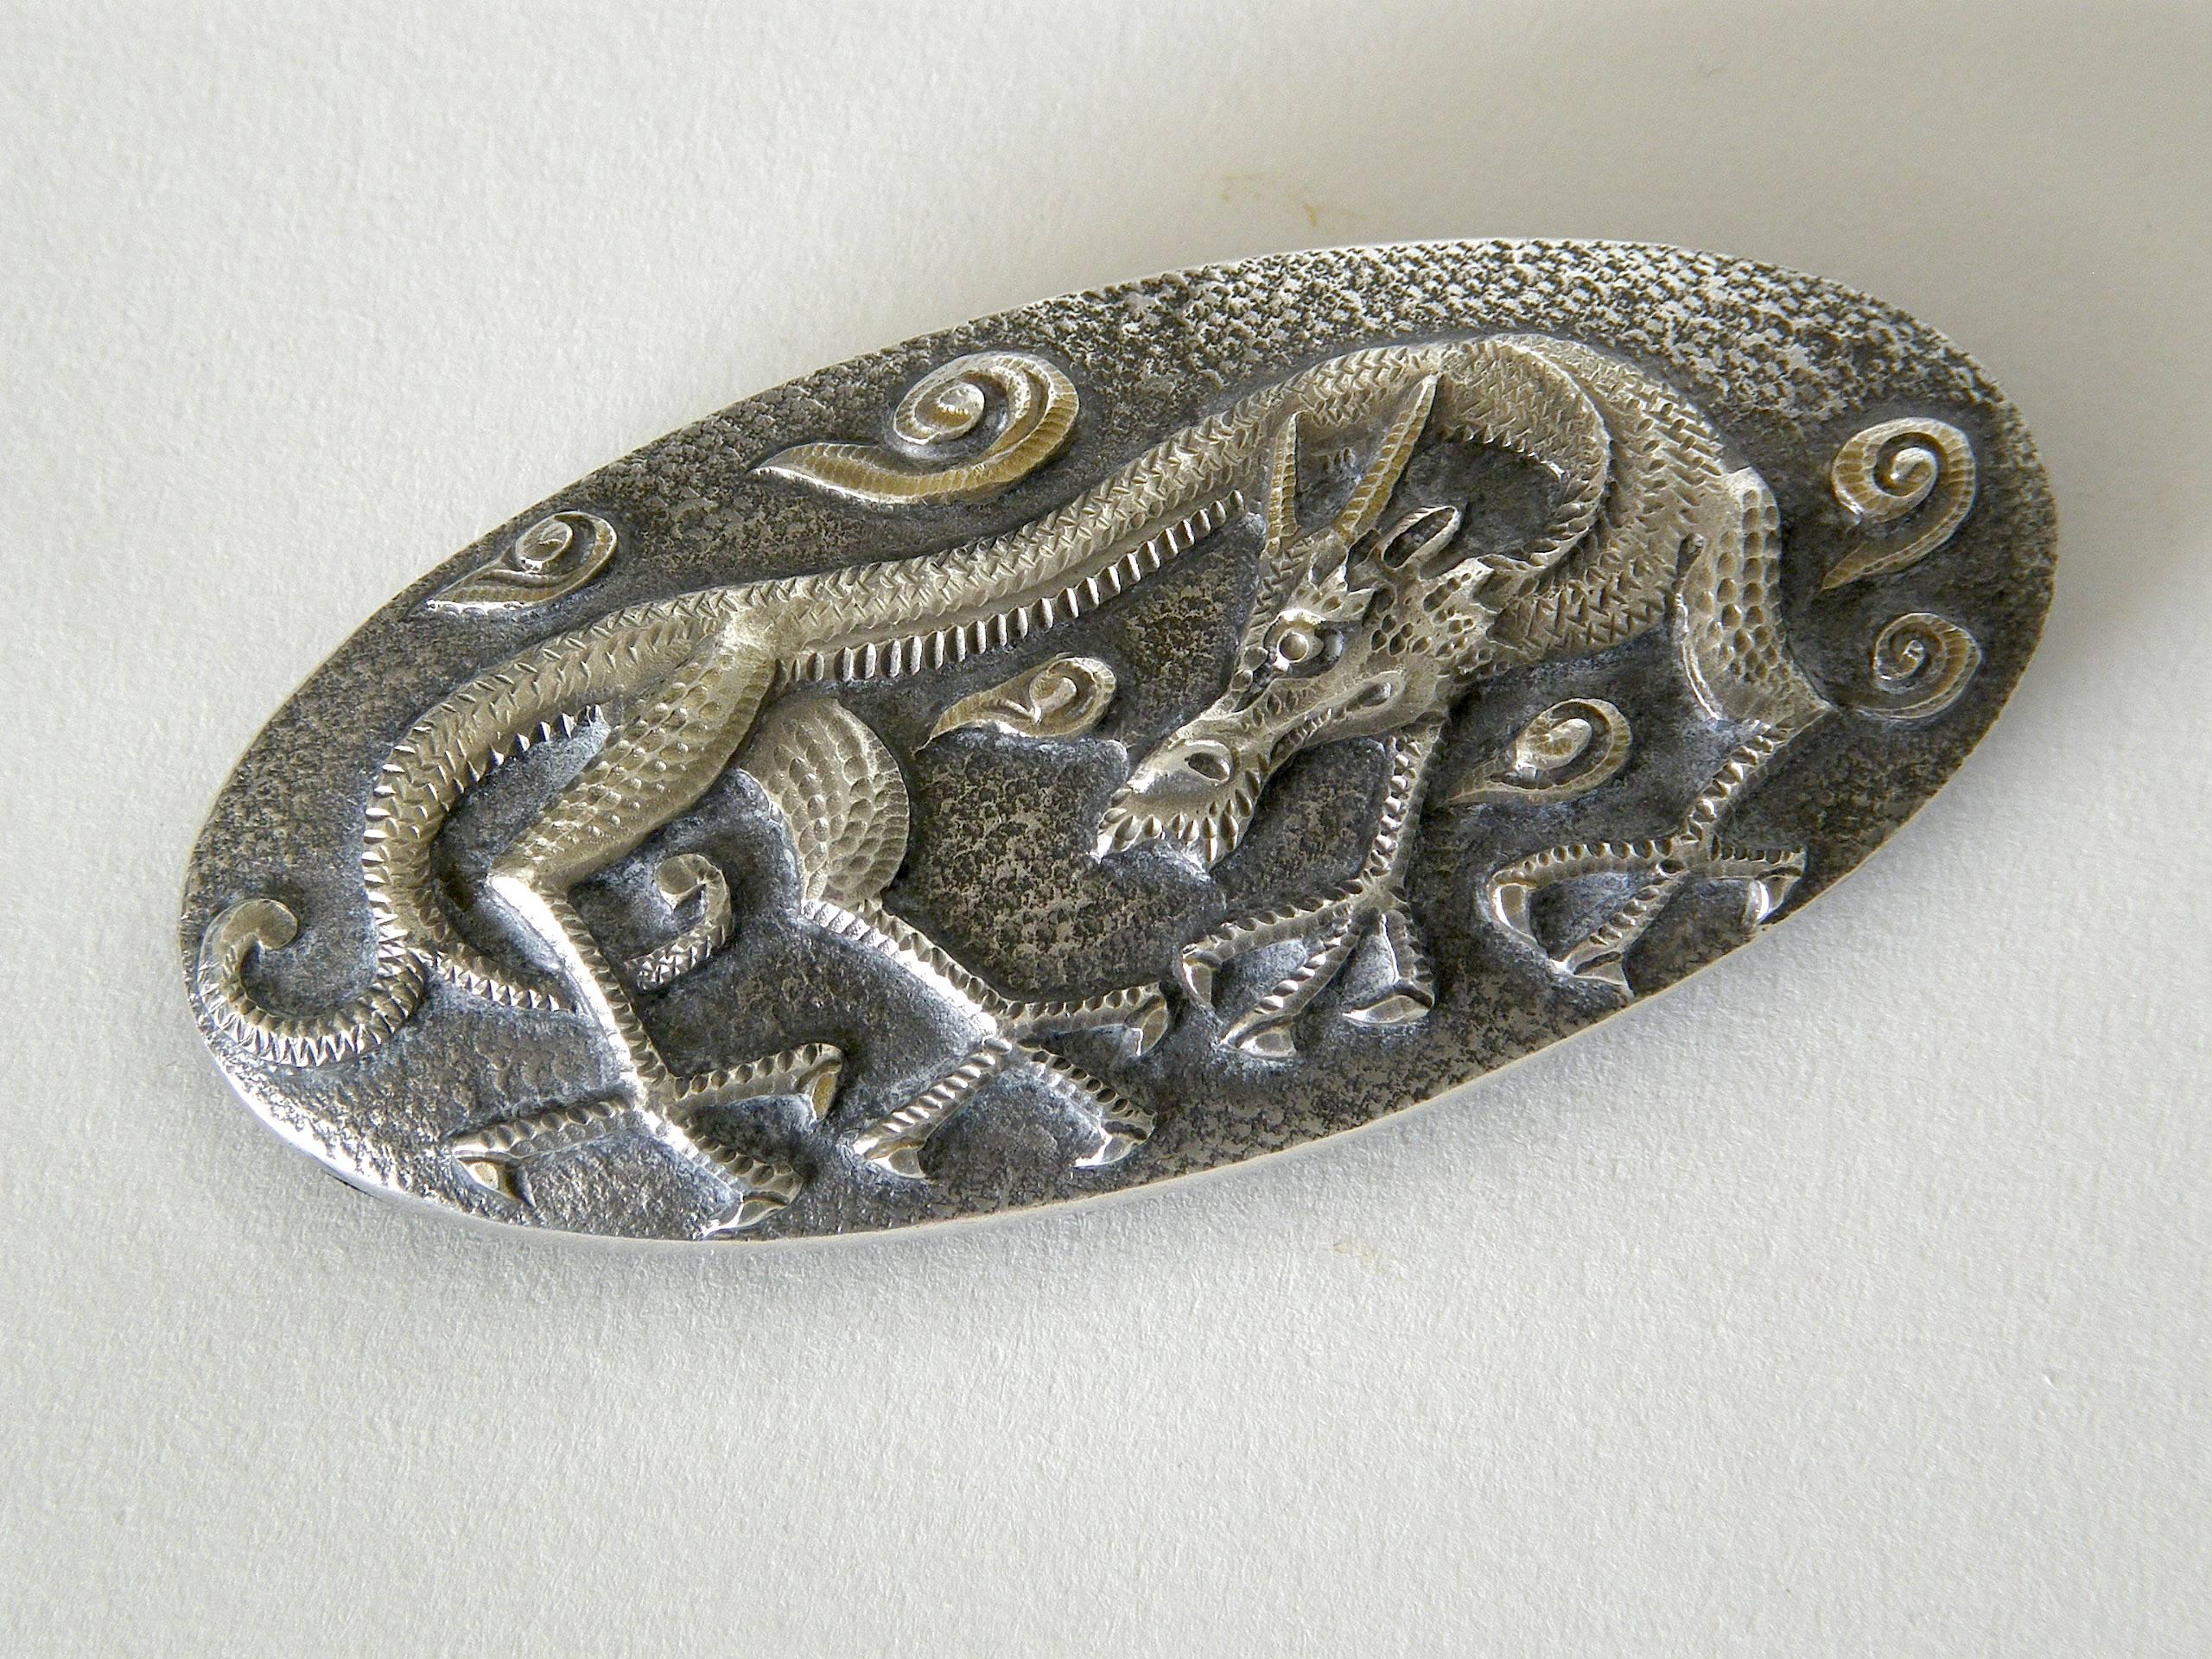 This wonderfully detailed, hand hammered belt buckle features a stylized dragon with huge claws and a forked tail. Abstract clouds swirl in the background. The design is rendered in relief with a three-dimensional effect. 

The front of the buckle